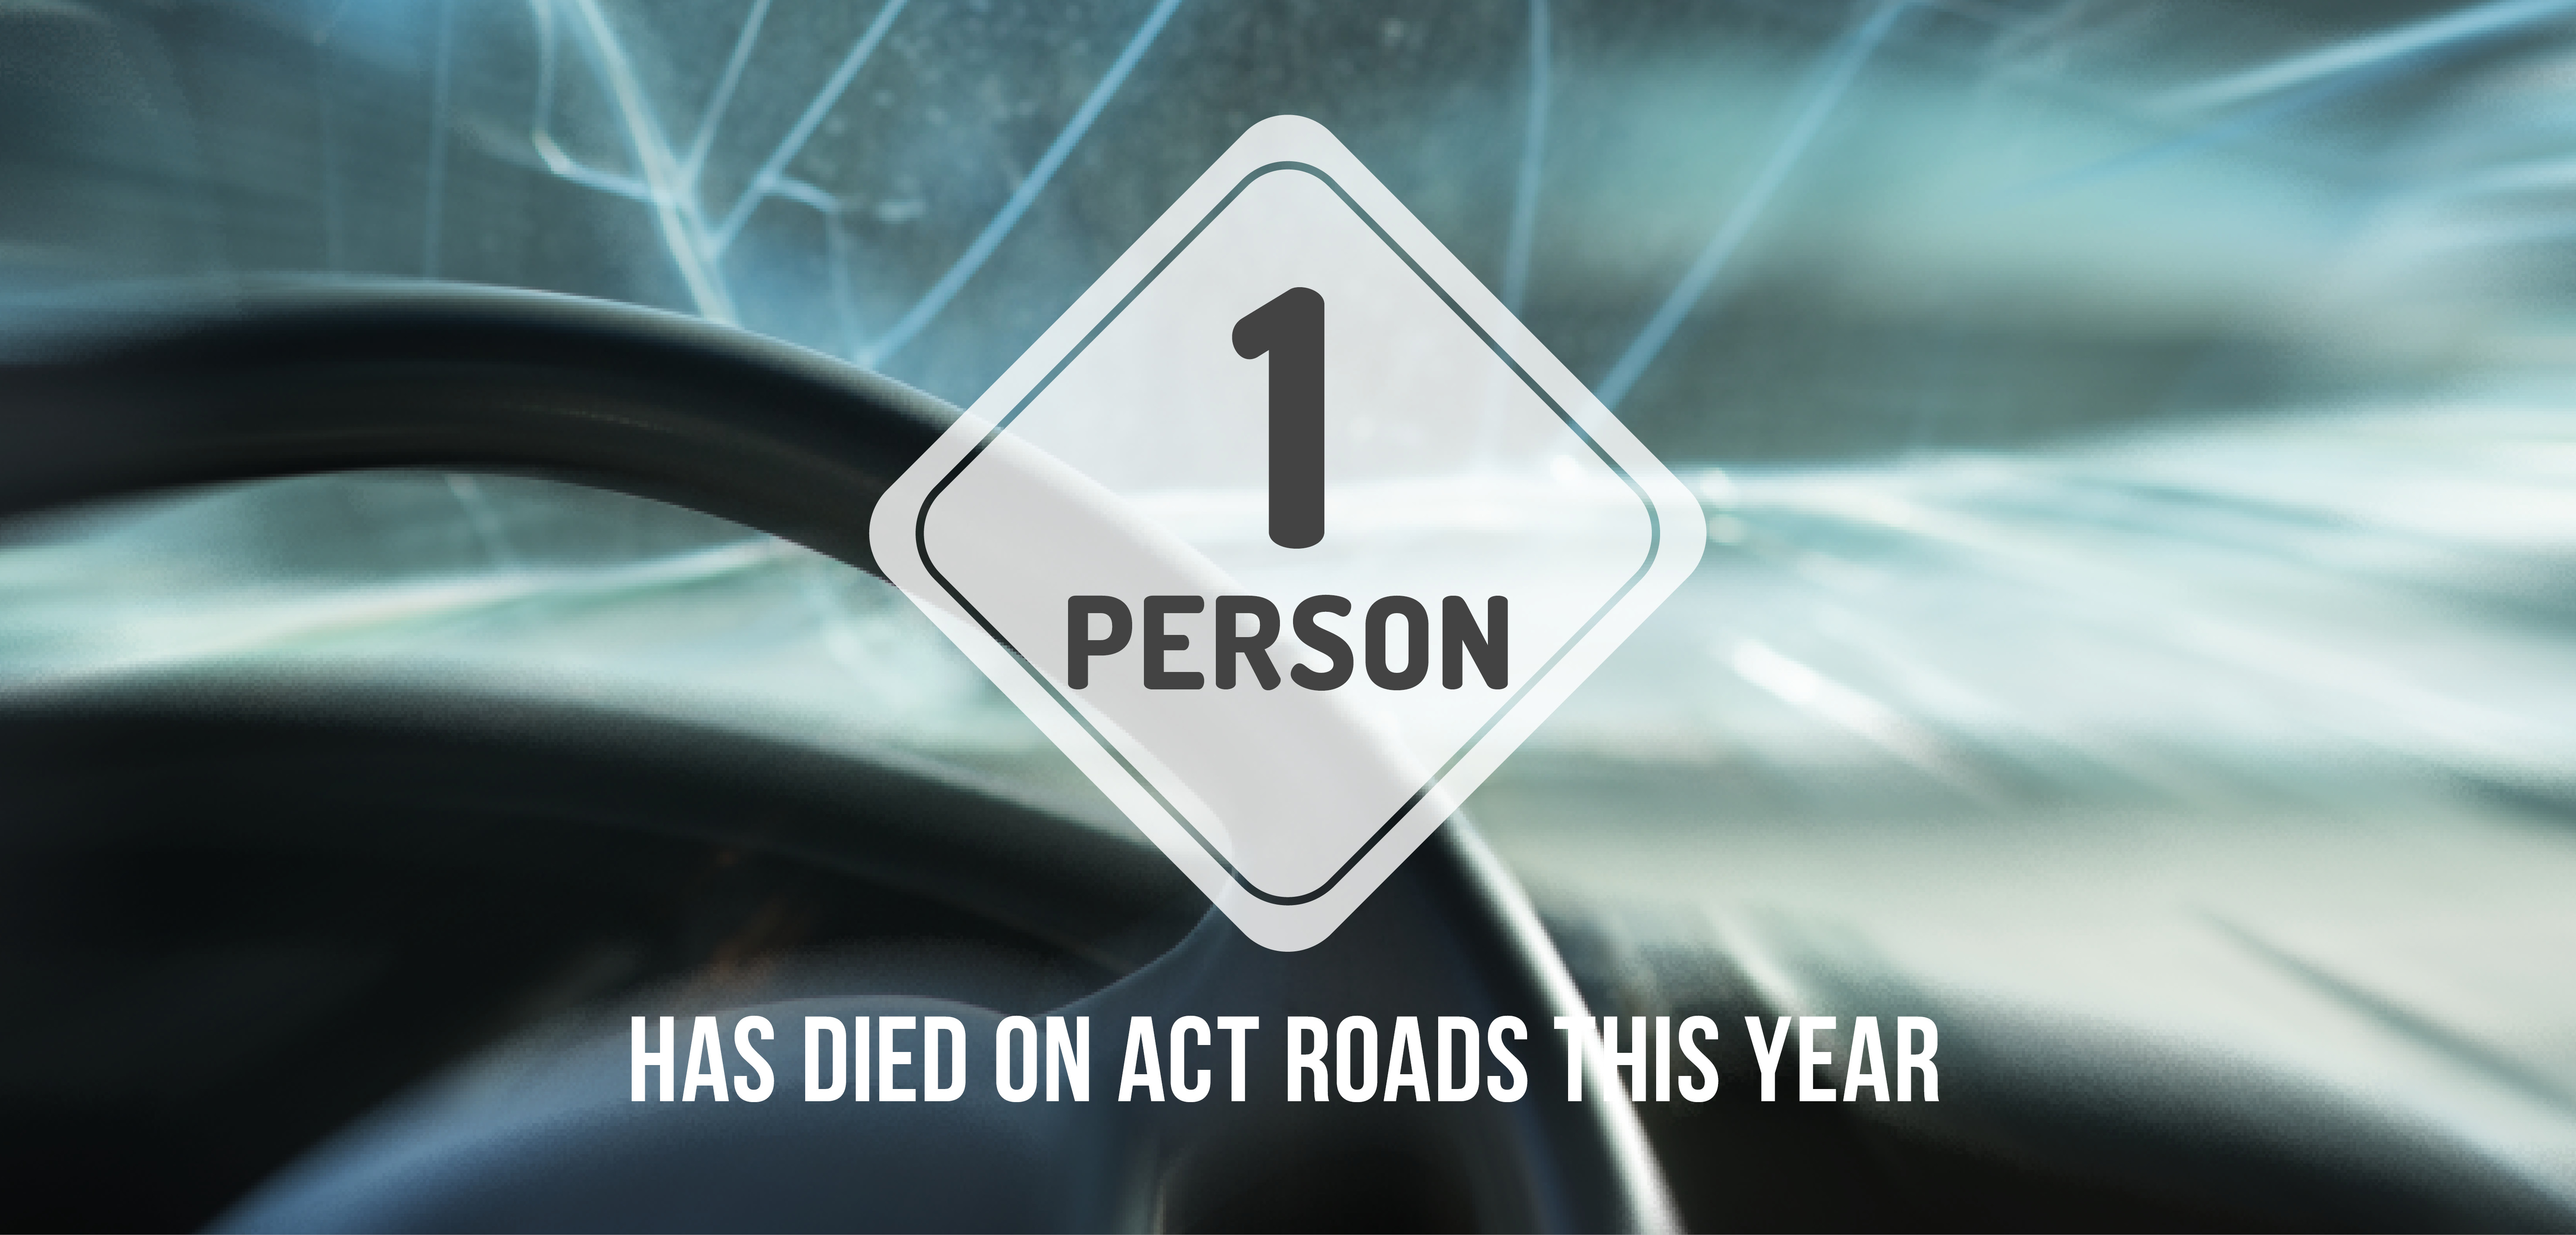 One person has died on ACT Roads this year